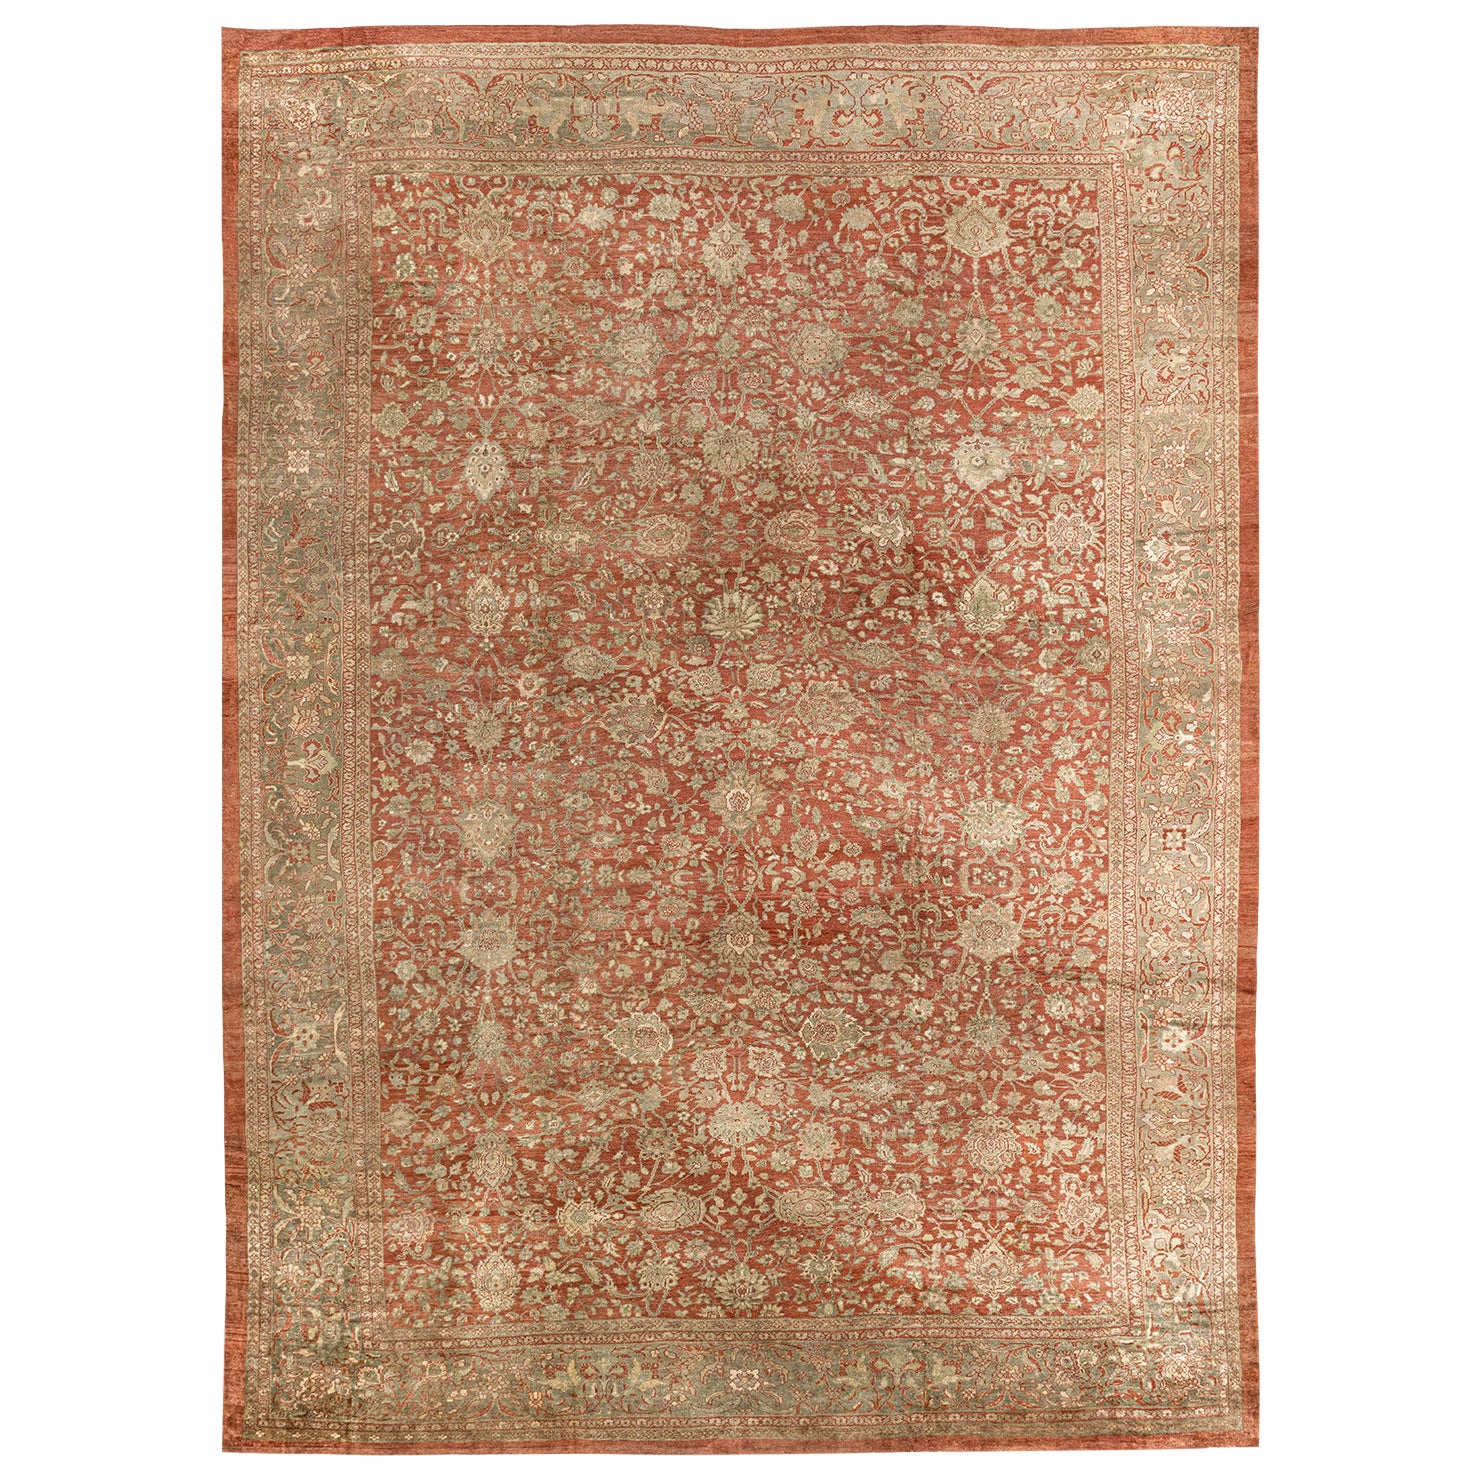 Antique Oversize Persian Terracotta Sultanabad Rug, circa 1880  17'6 x 23'9 For Sale